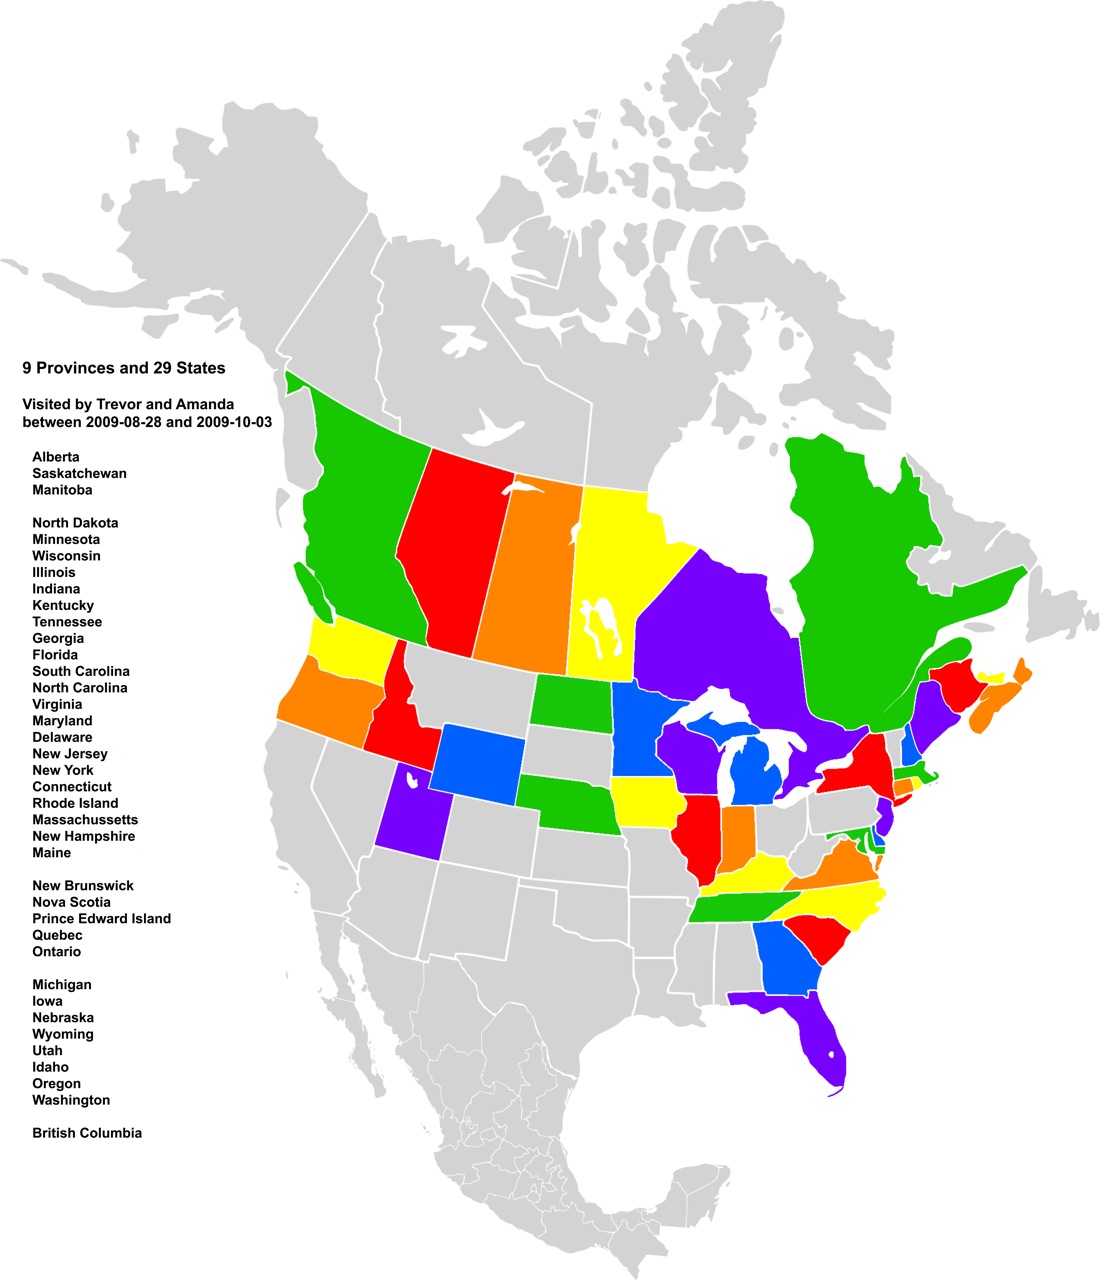 States and provinces visited